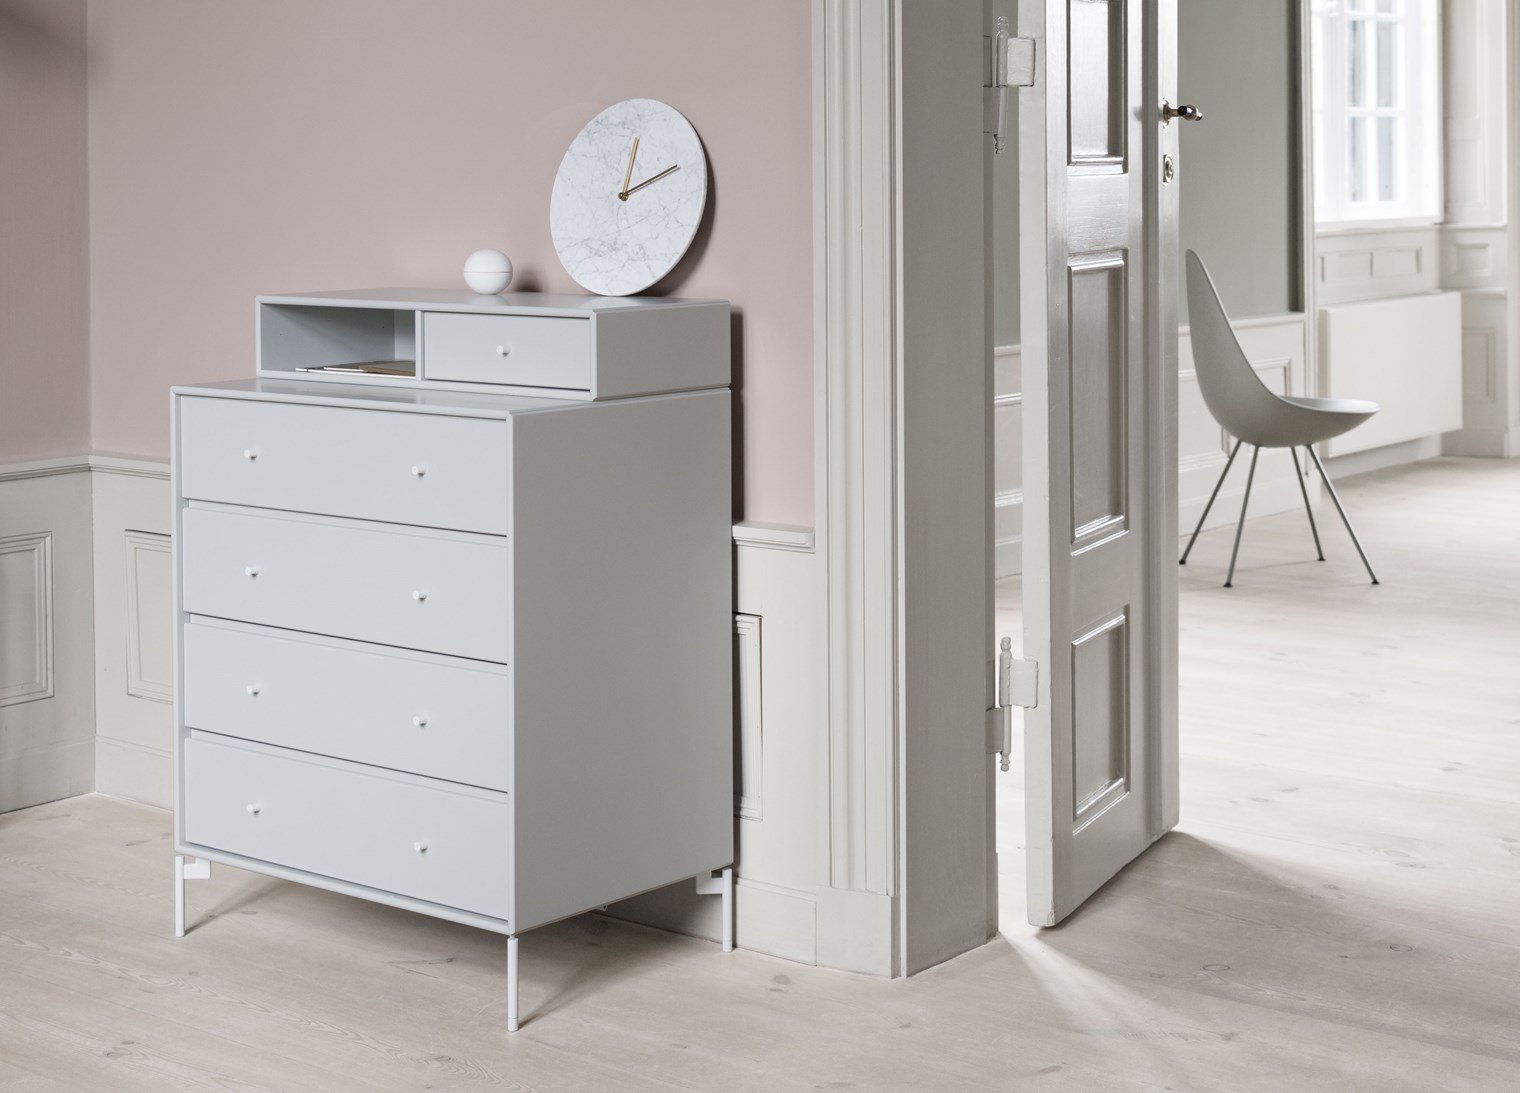 Montana Keep Chest Of Drawers Of Drawers With Legs, Mist/Snow White